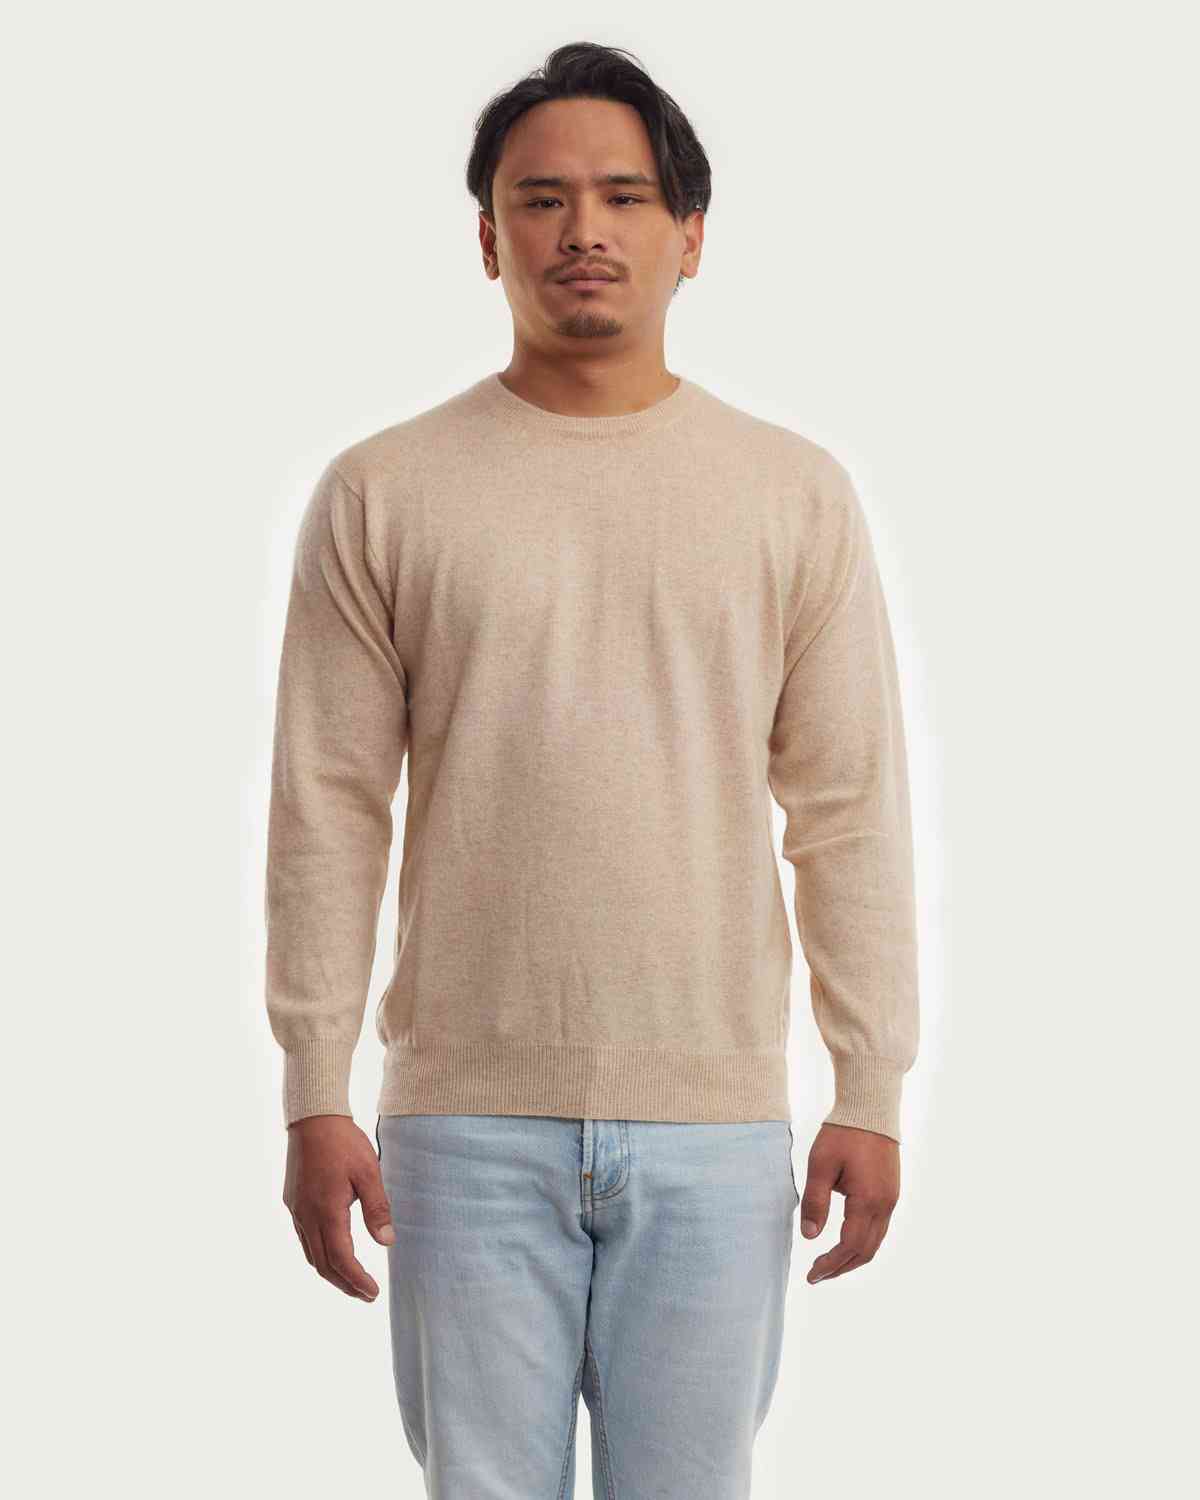 Men’s Round Neck 50% Cashmere 50% wool Sweater/Pullover. Made in Nepal